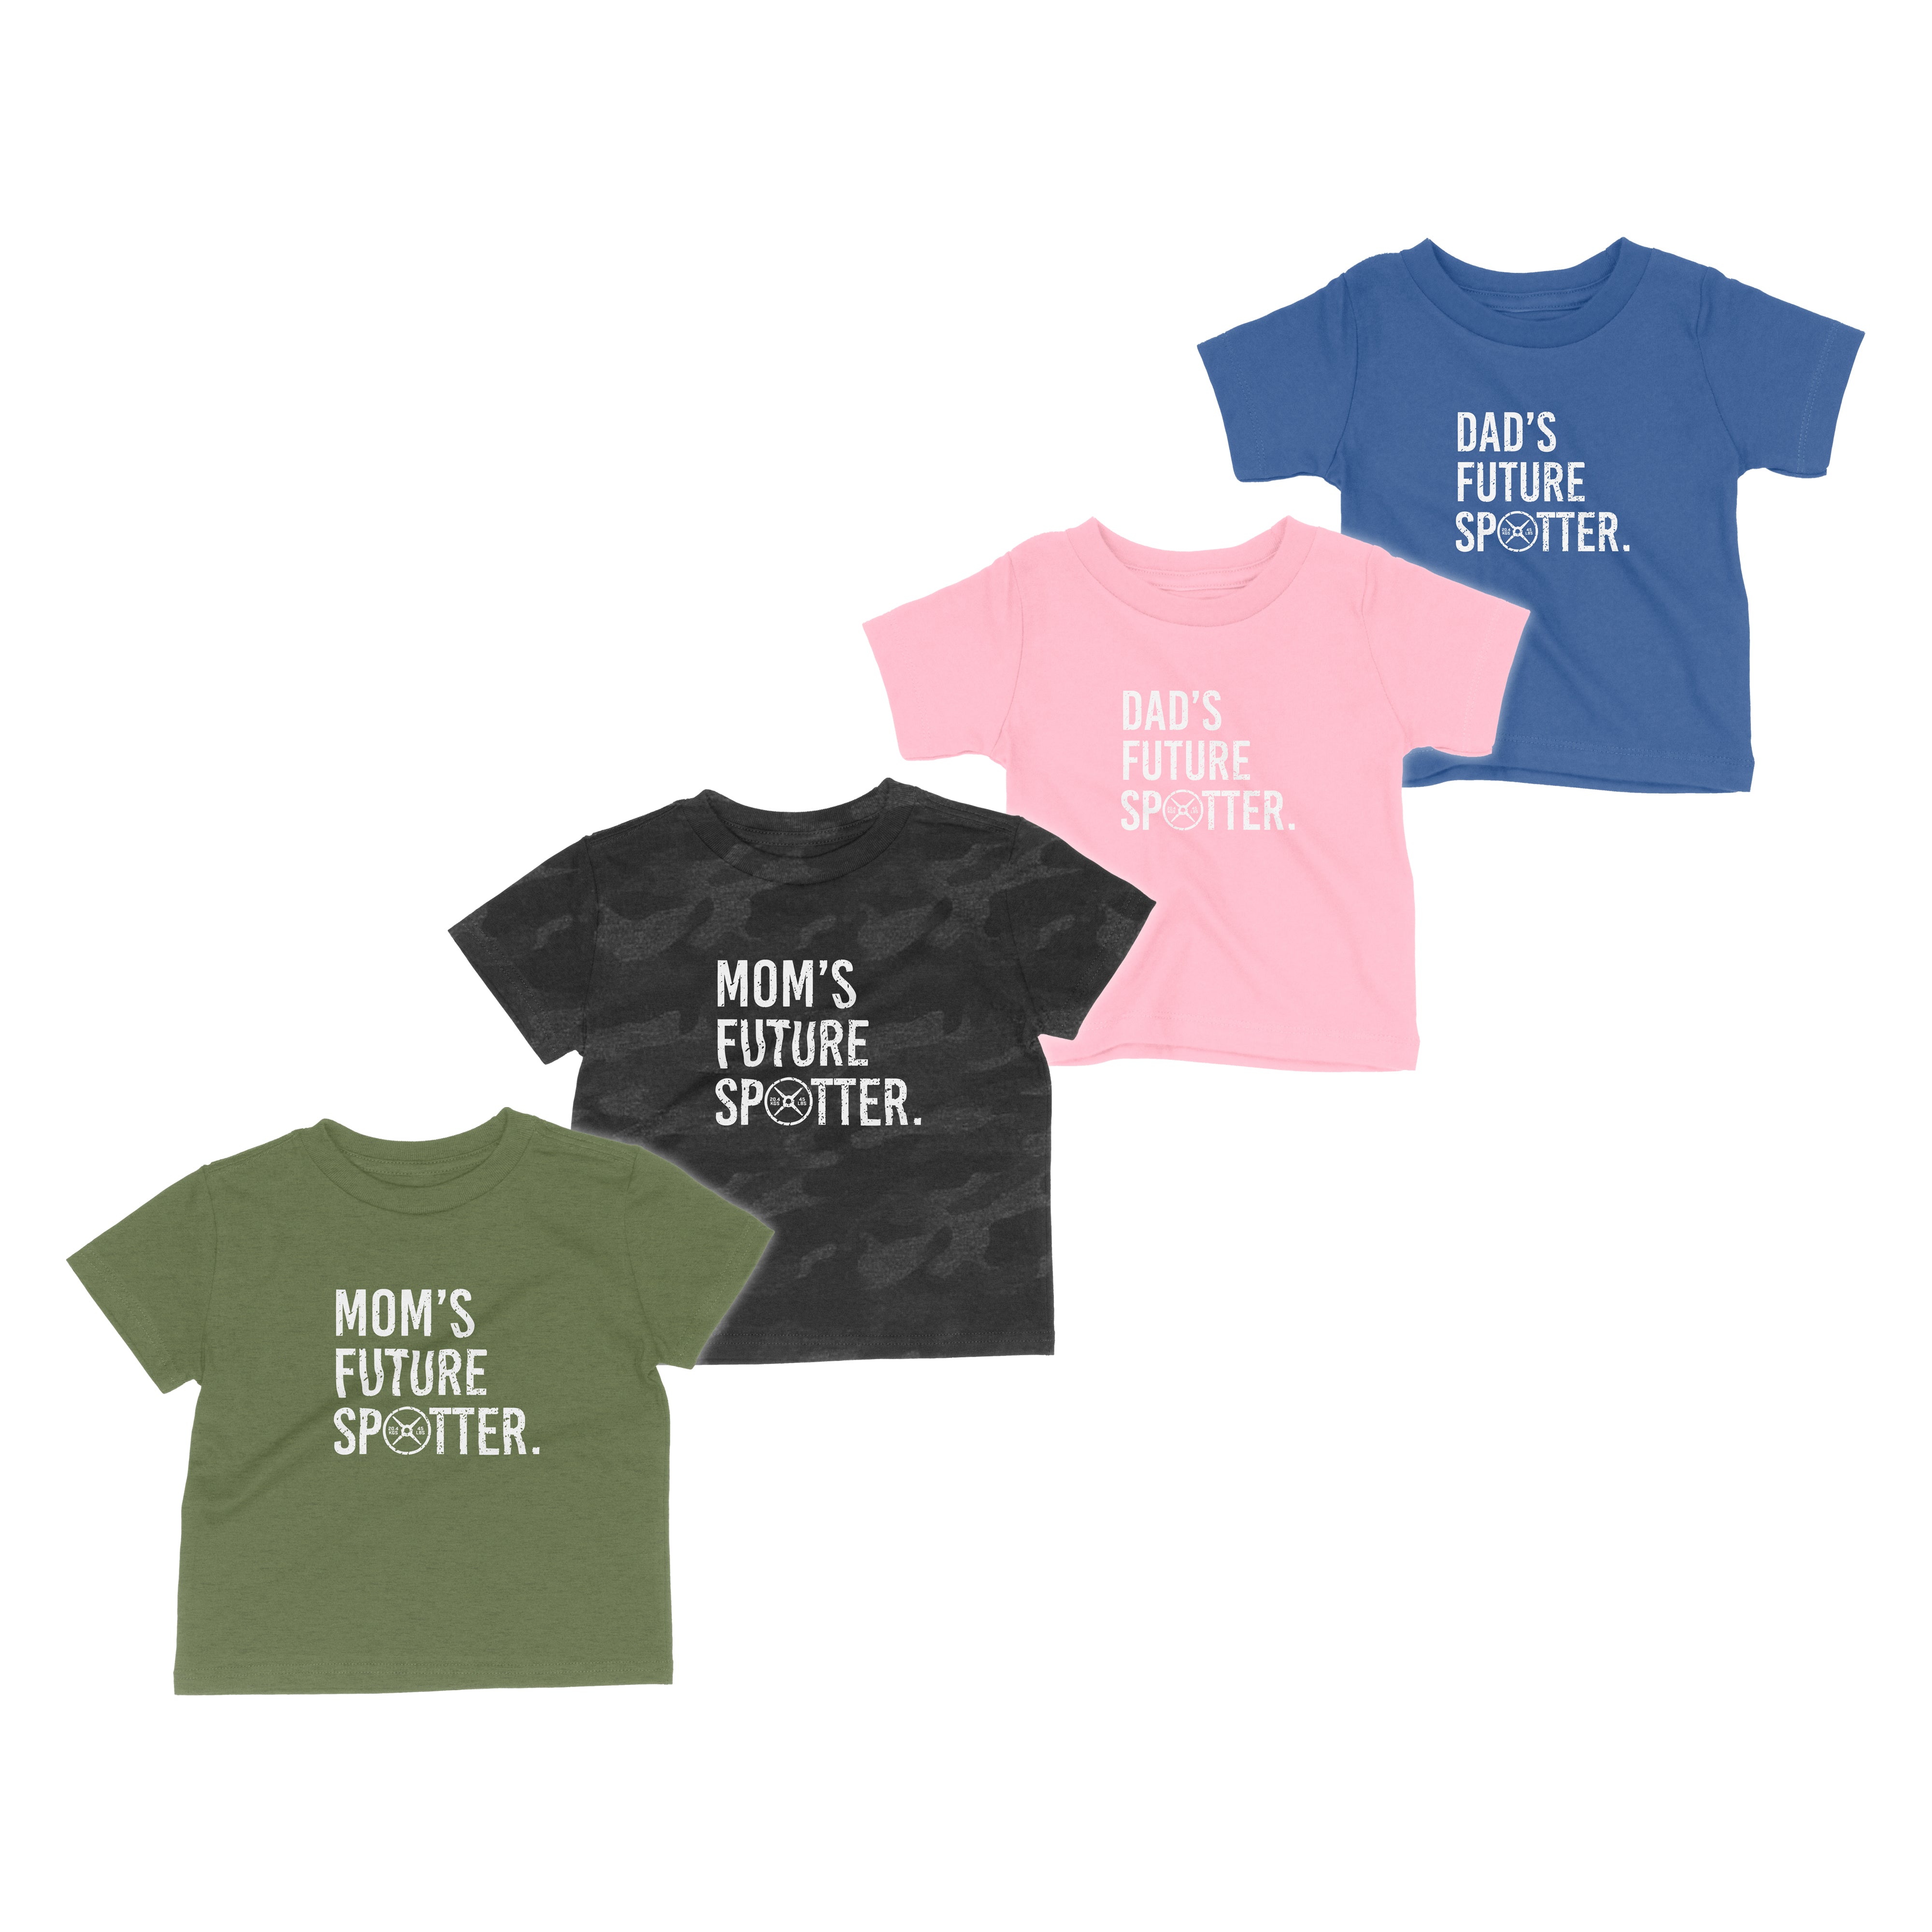 Mom Future Spotter Toddler Tee